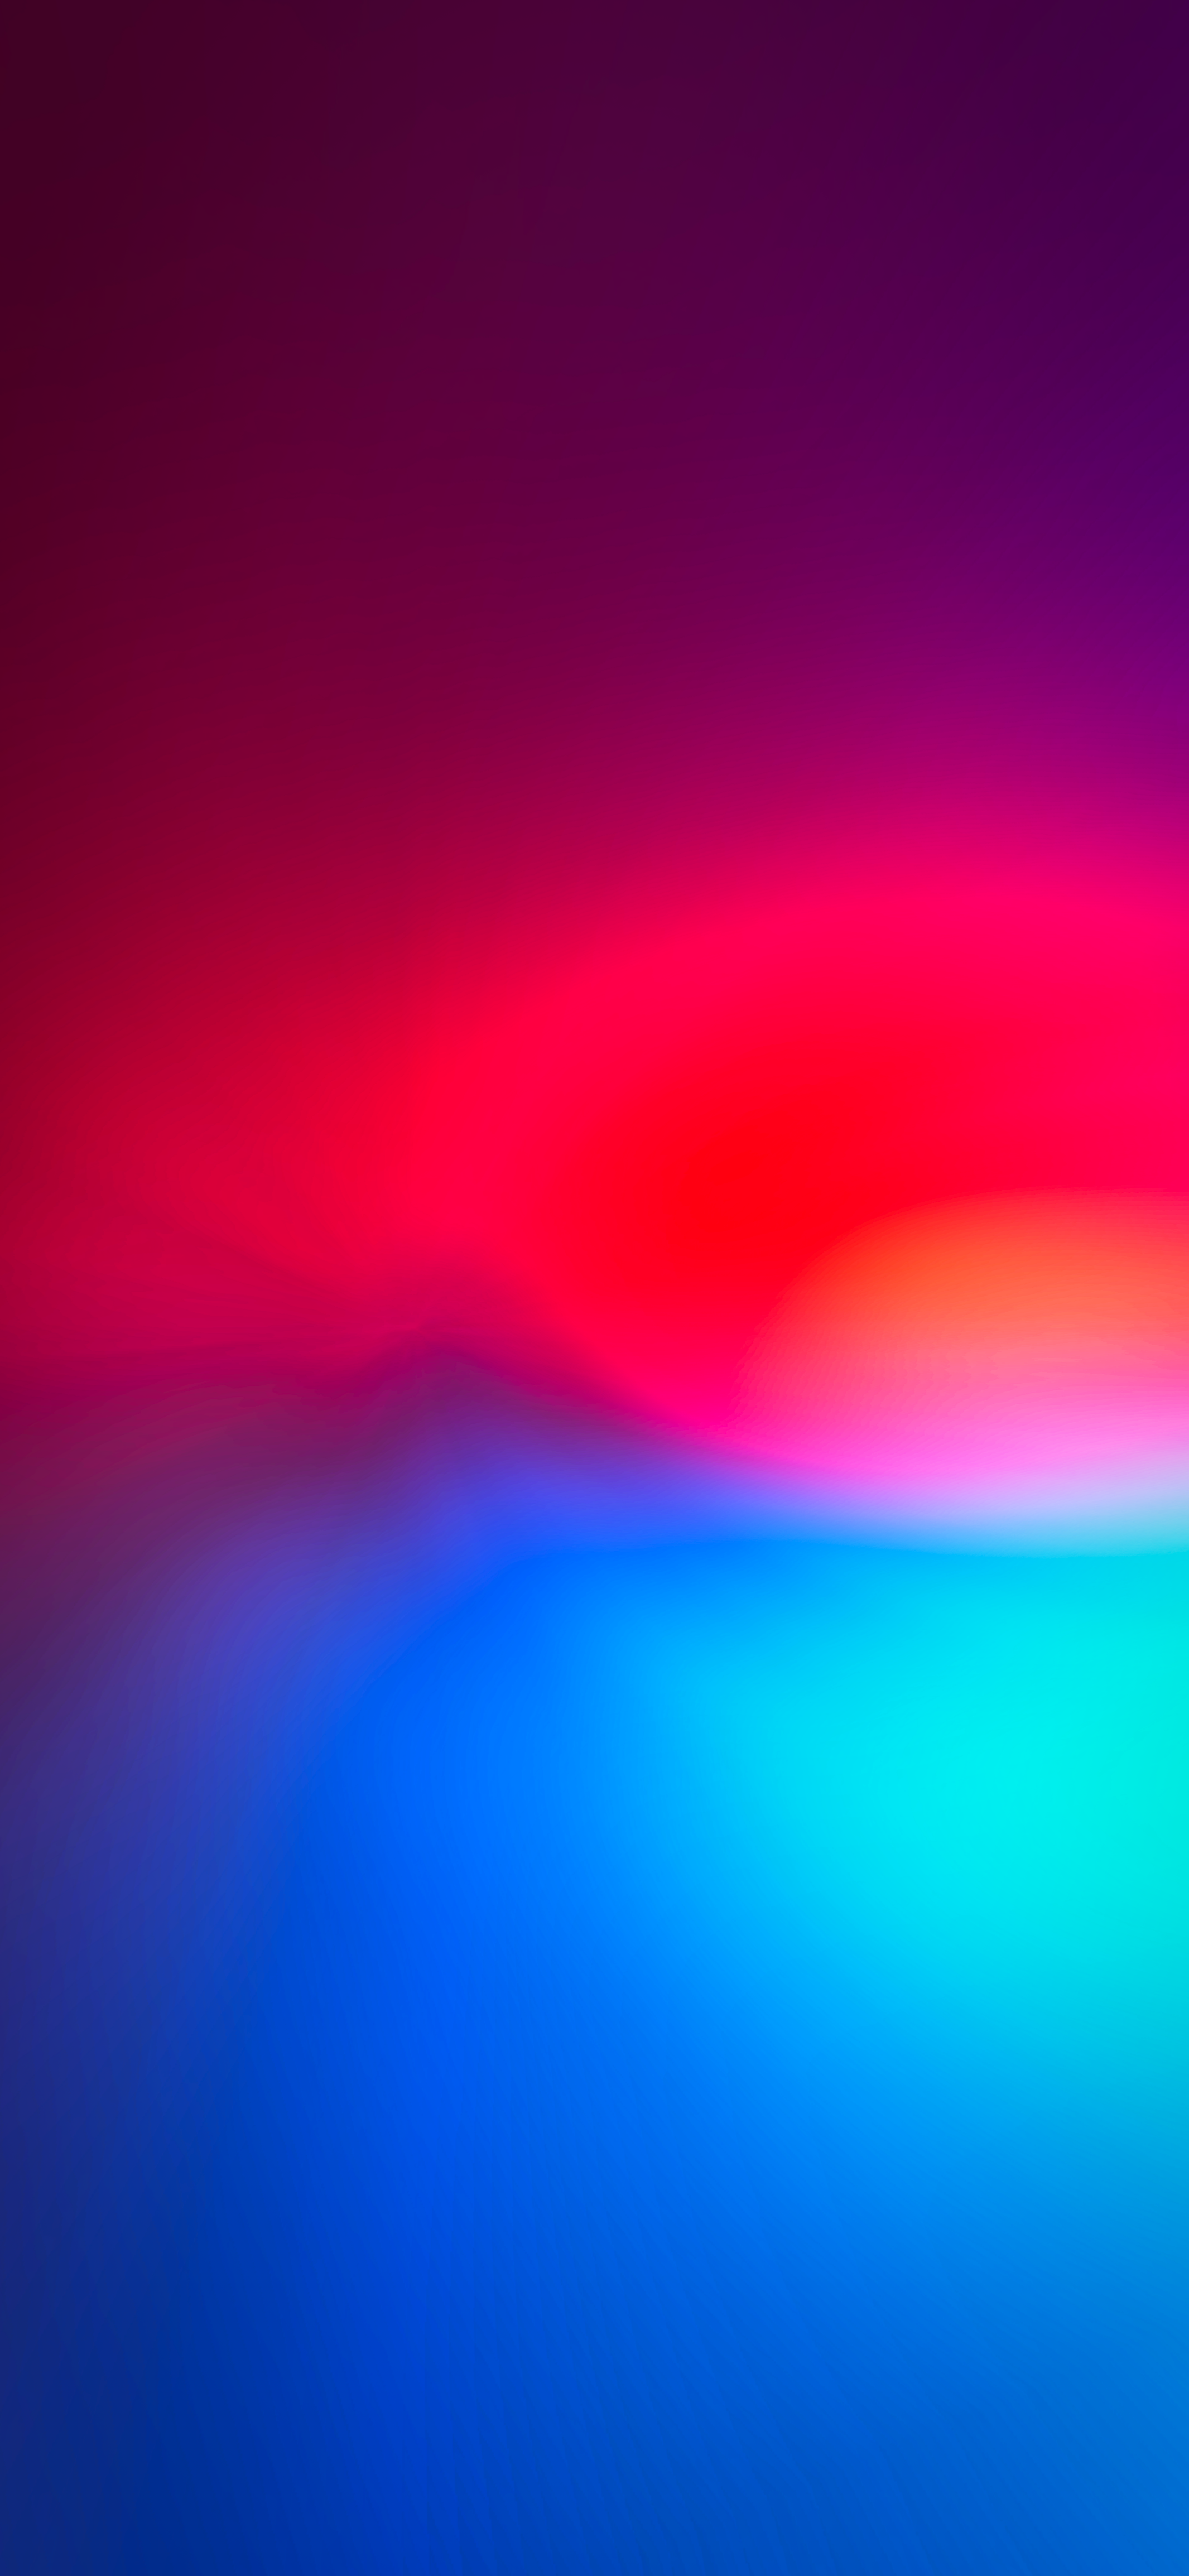 Red to blue gradient on Twitter. Samsung wallpaper, Blue wallpaper iphone, Storm wallpaper